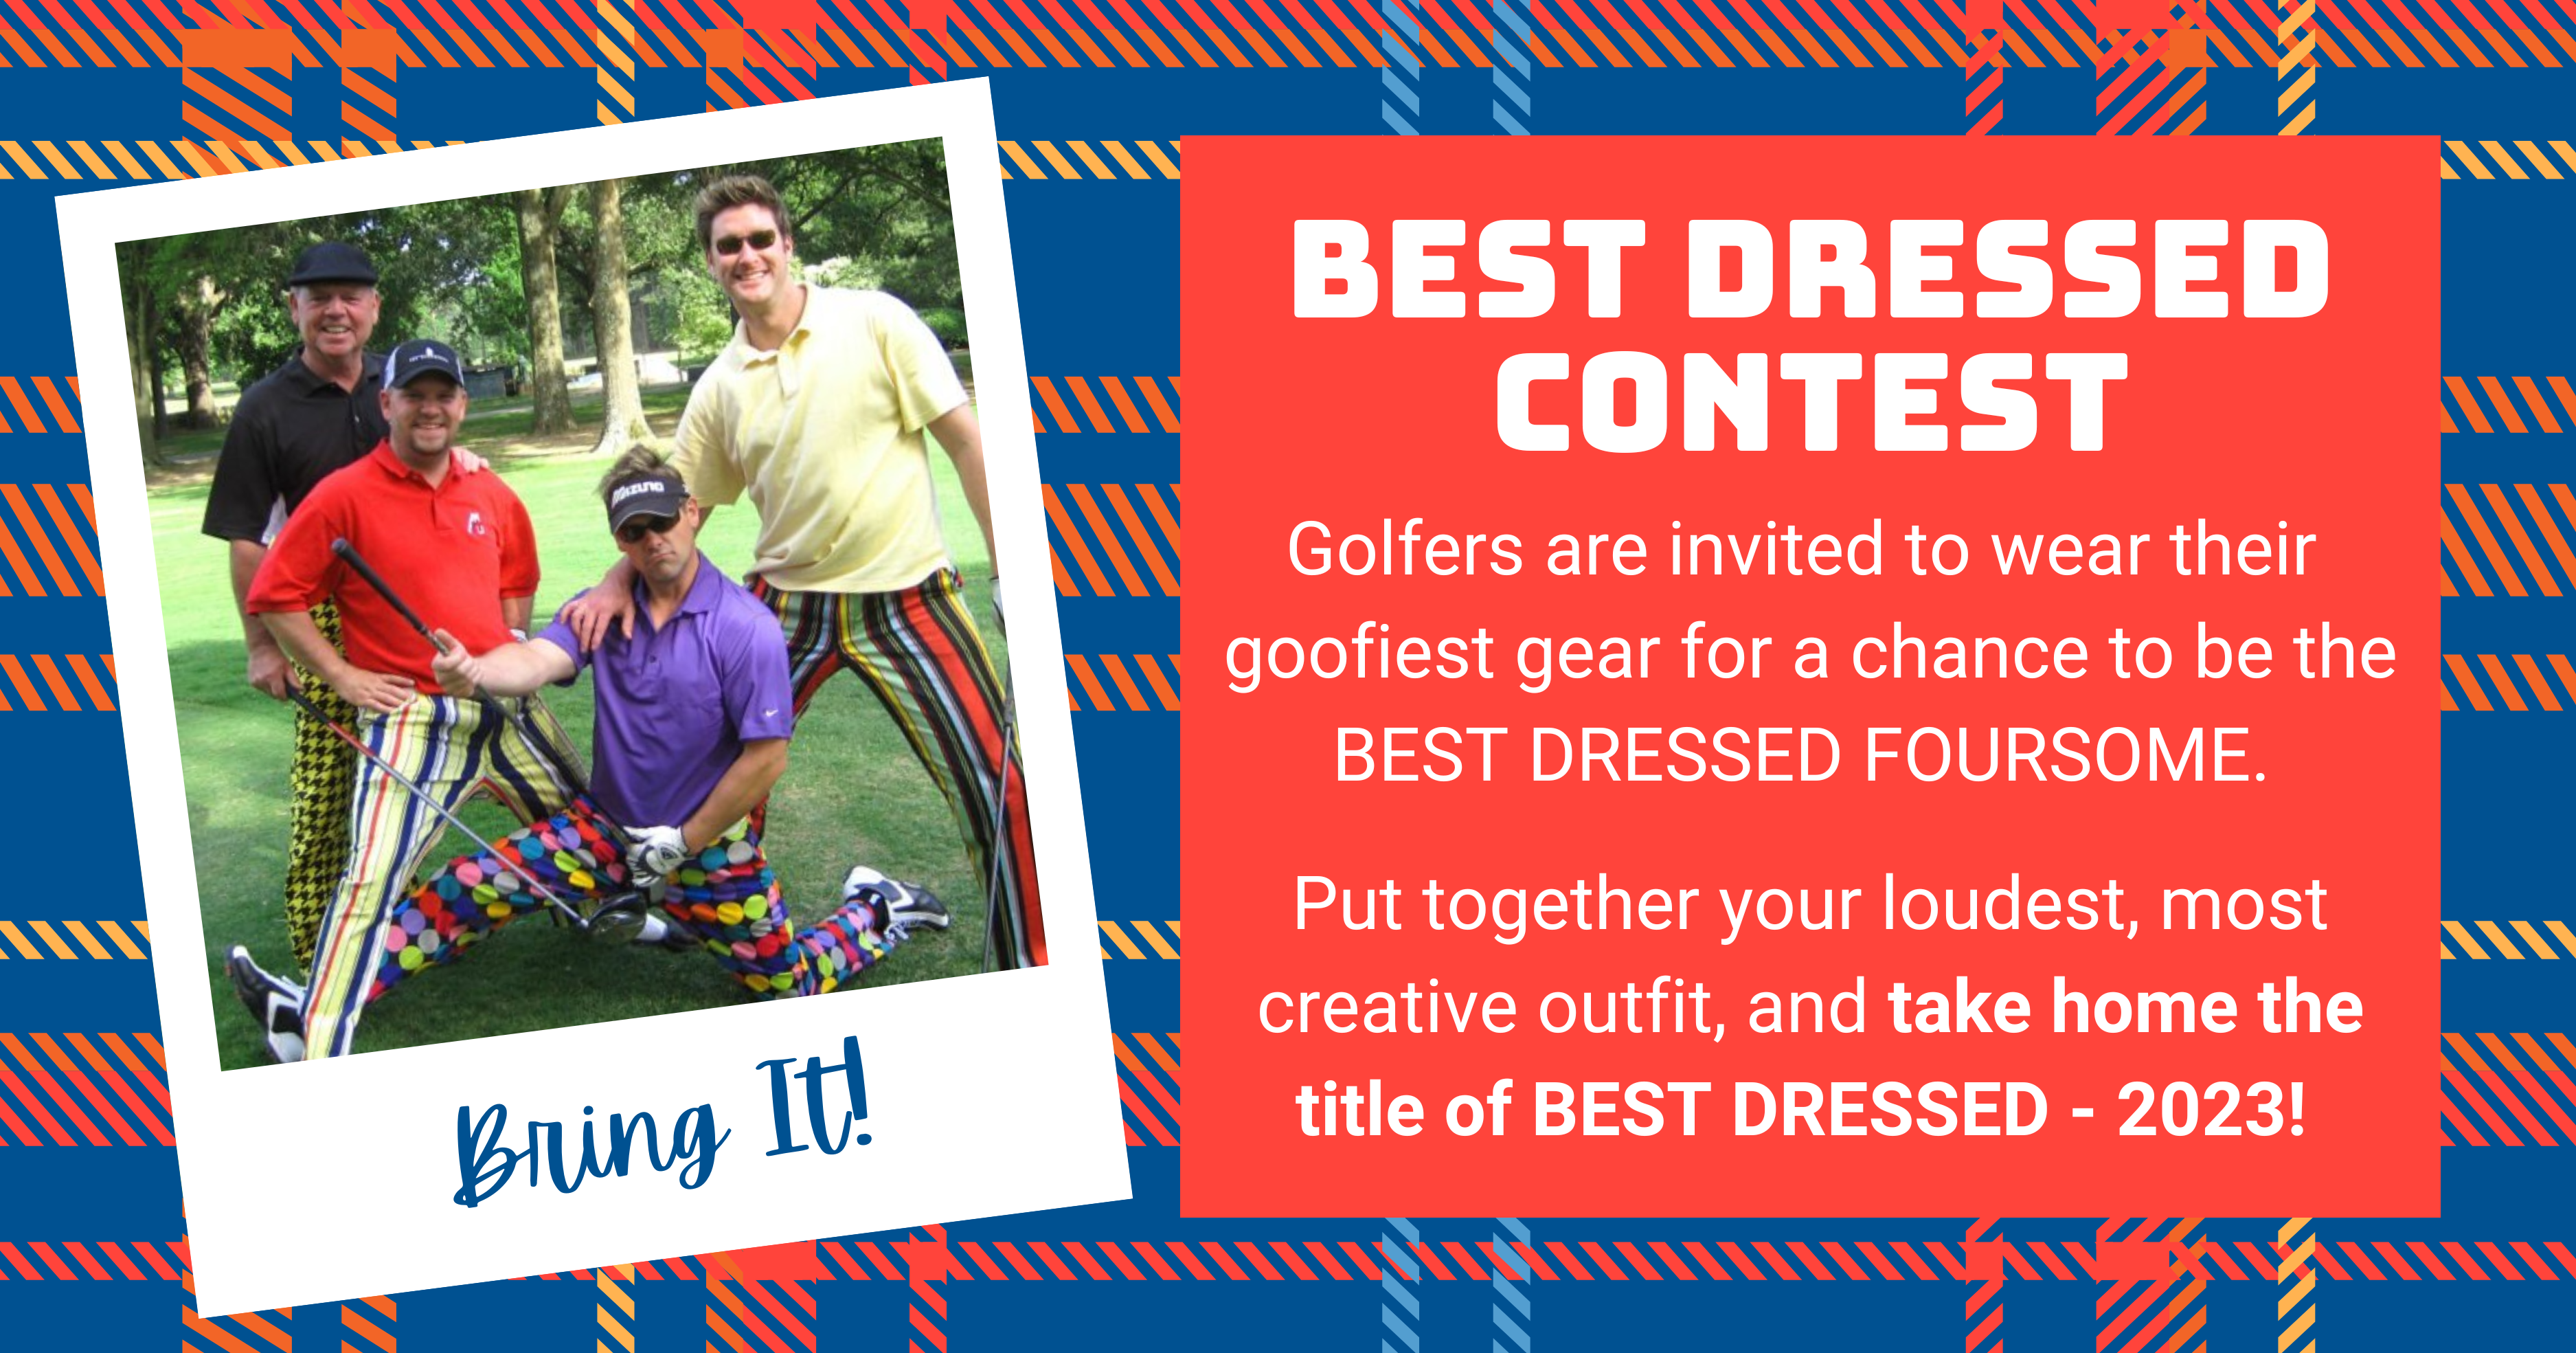 Golfers showed up in their goofiest gear (1)